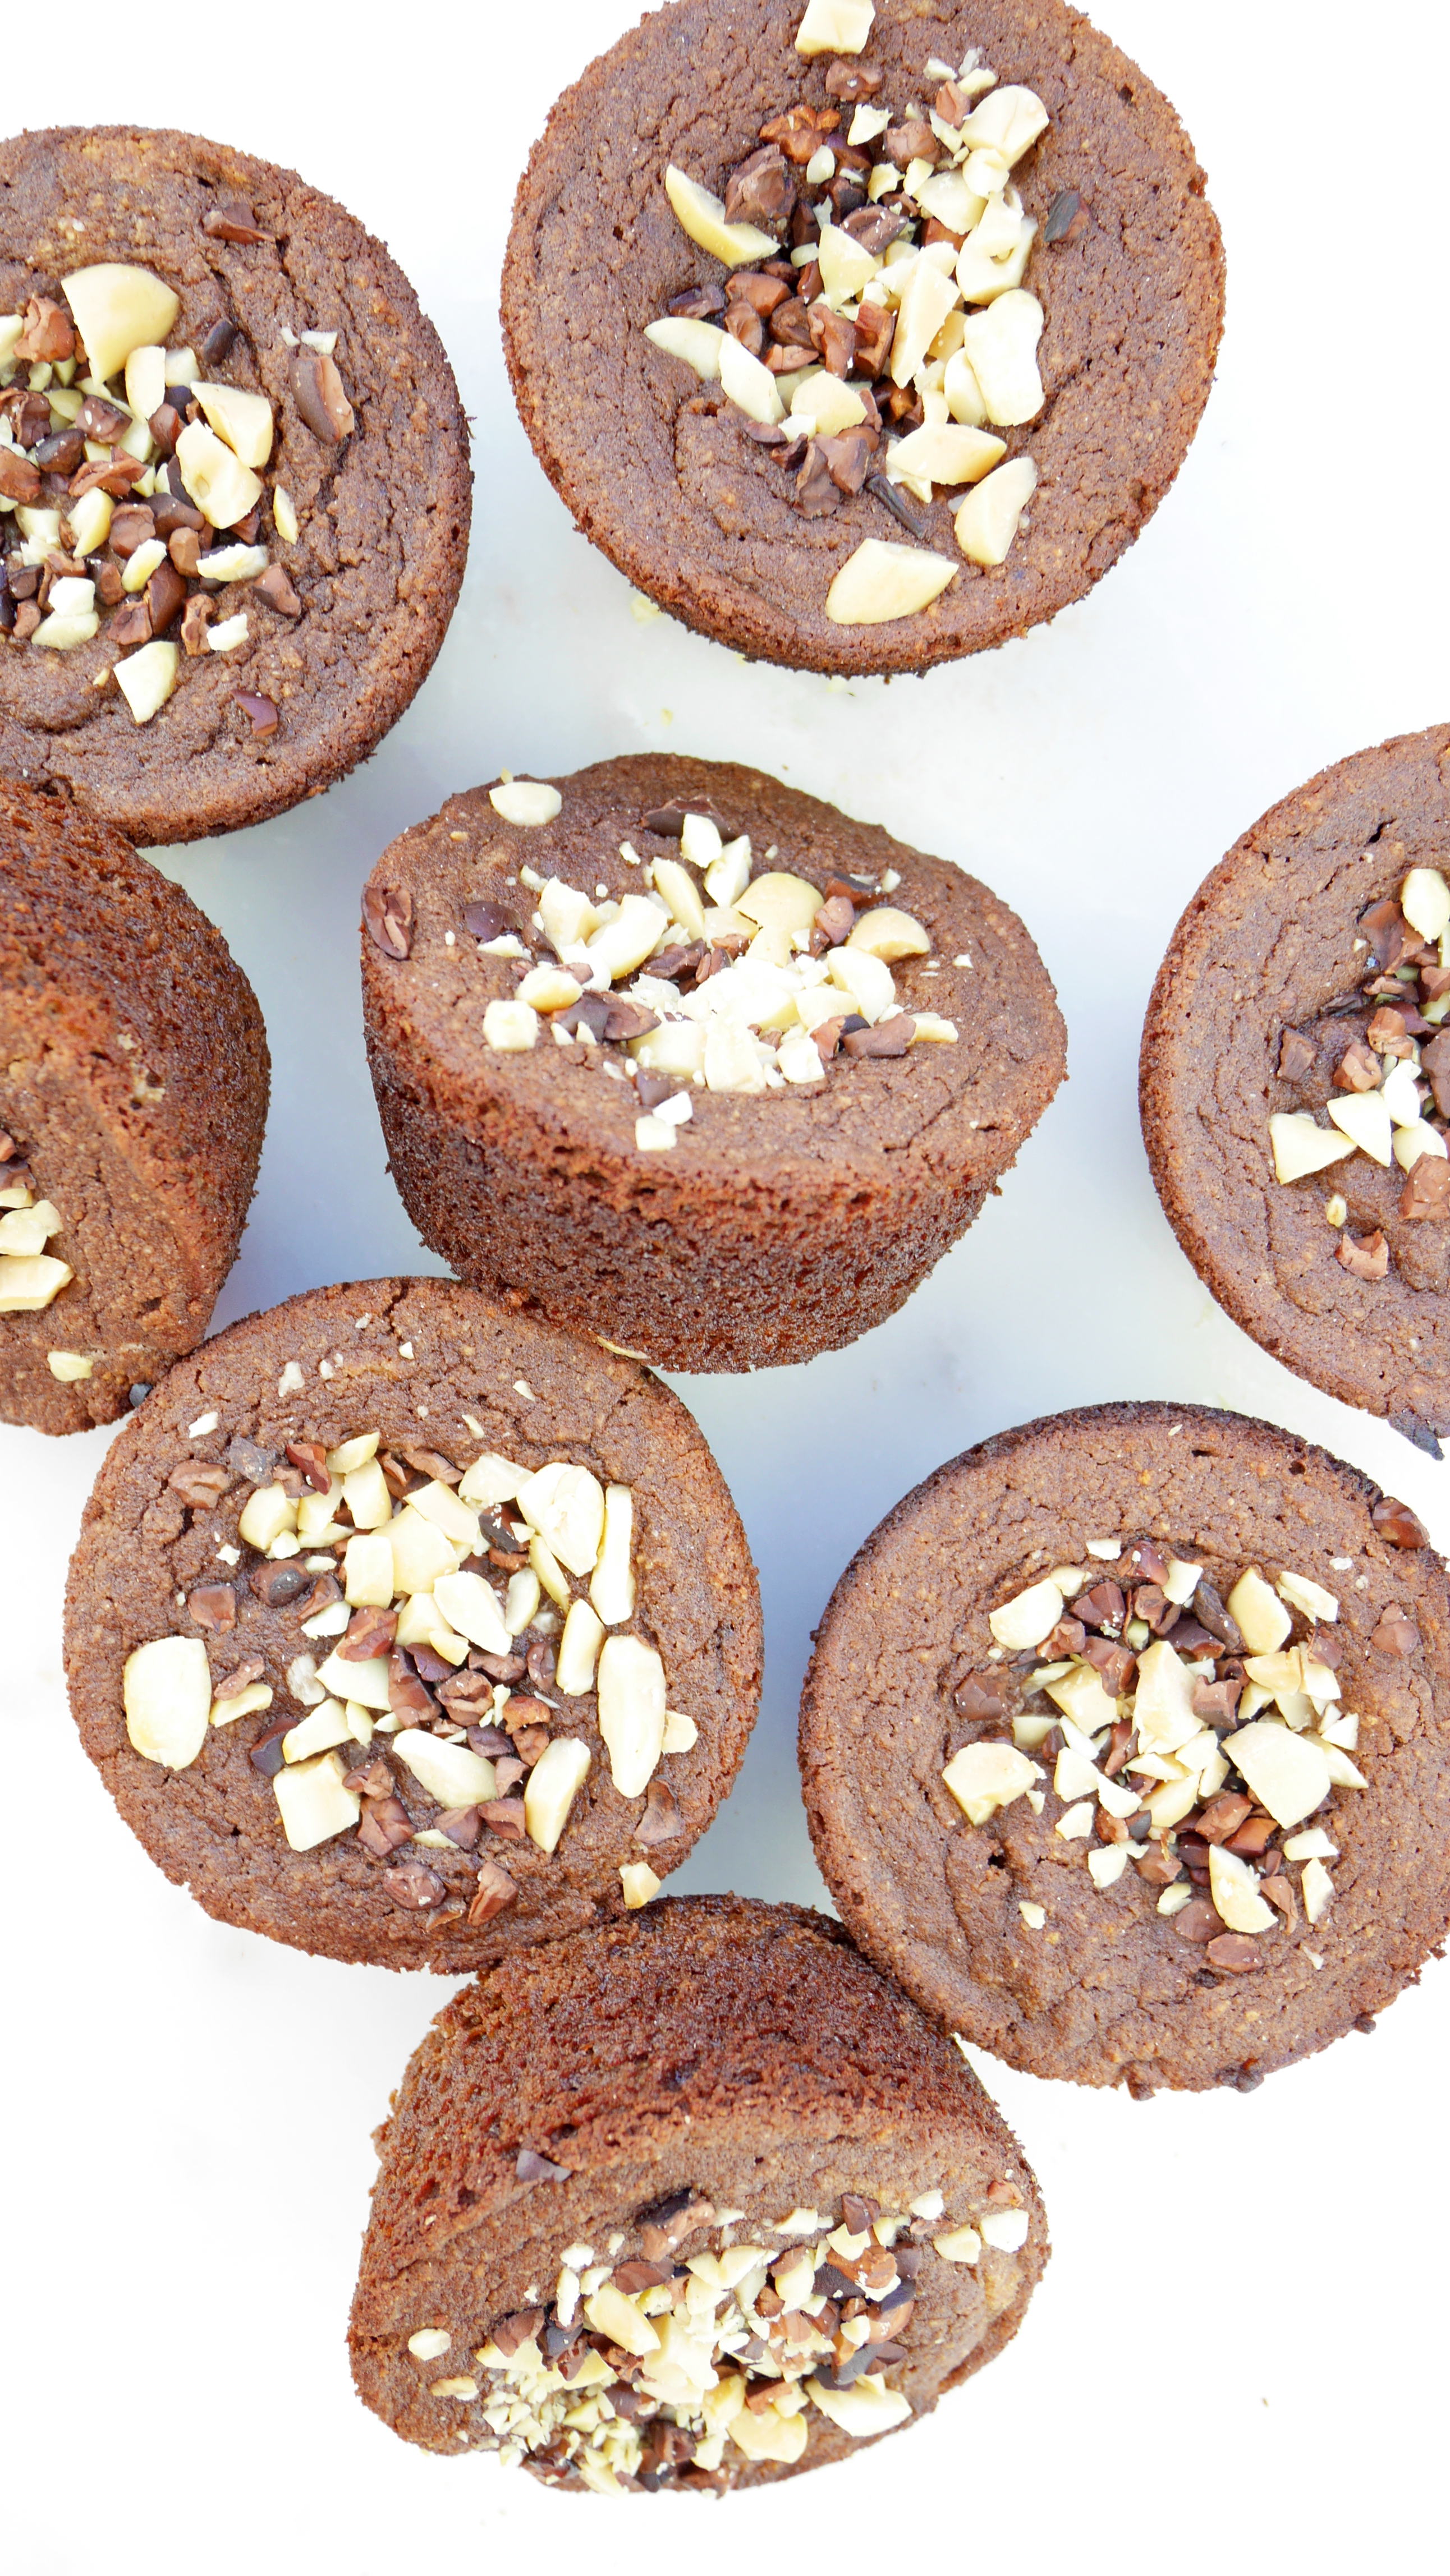 PB-stuffed chocolate muffins that sneaks in your veggies? Sign me up, yall! Peanut Butter-Stuffed Chocolate Veggie Muffins Sneakz Organic Milkshakes